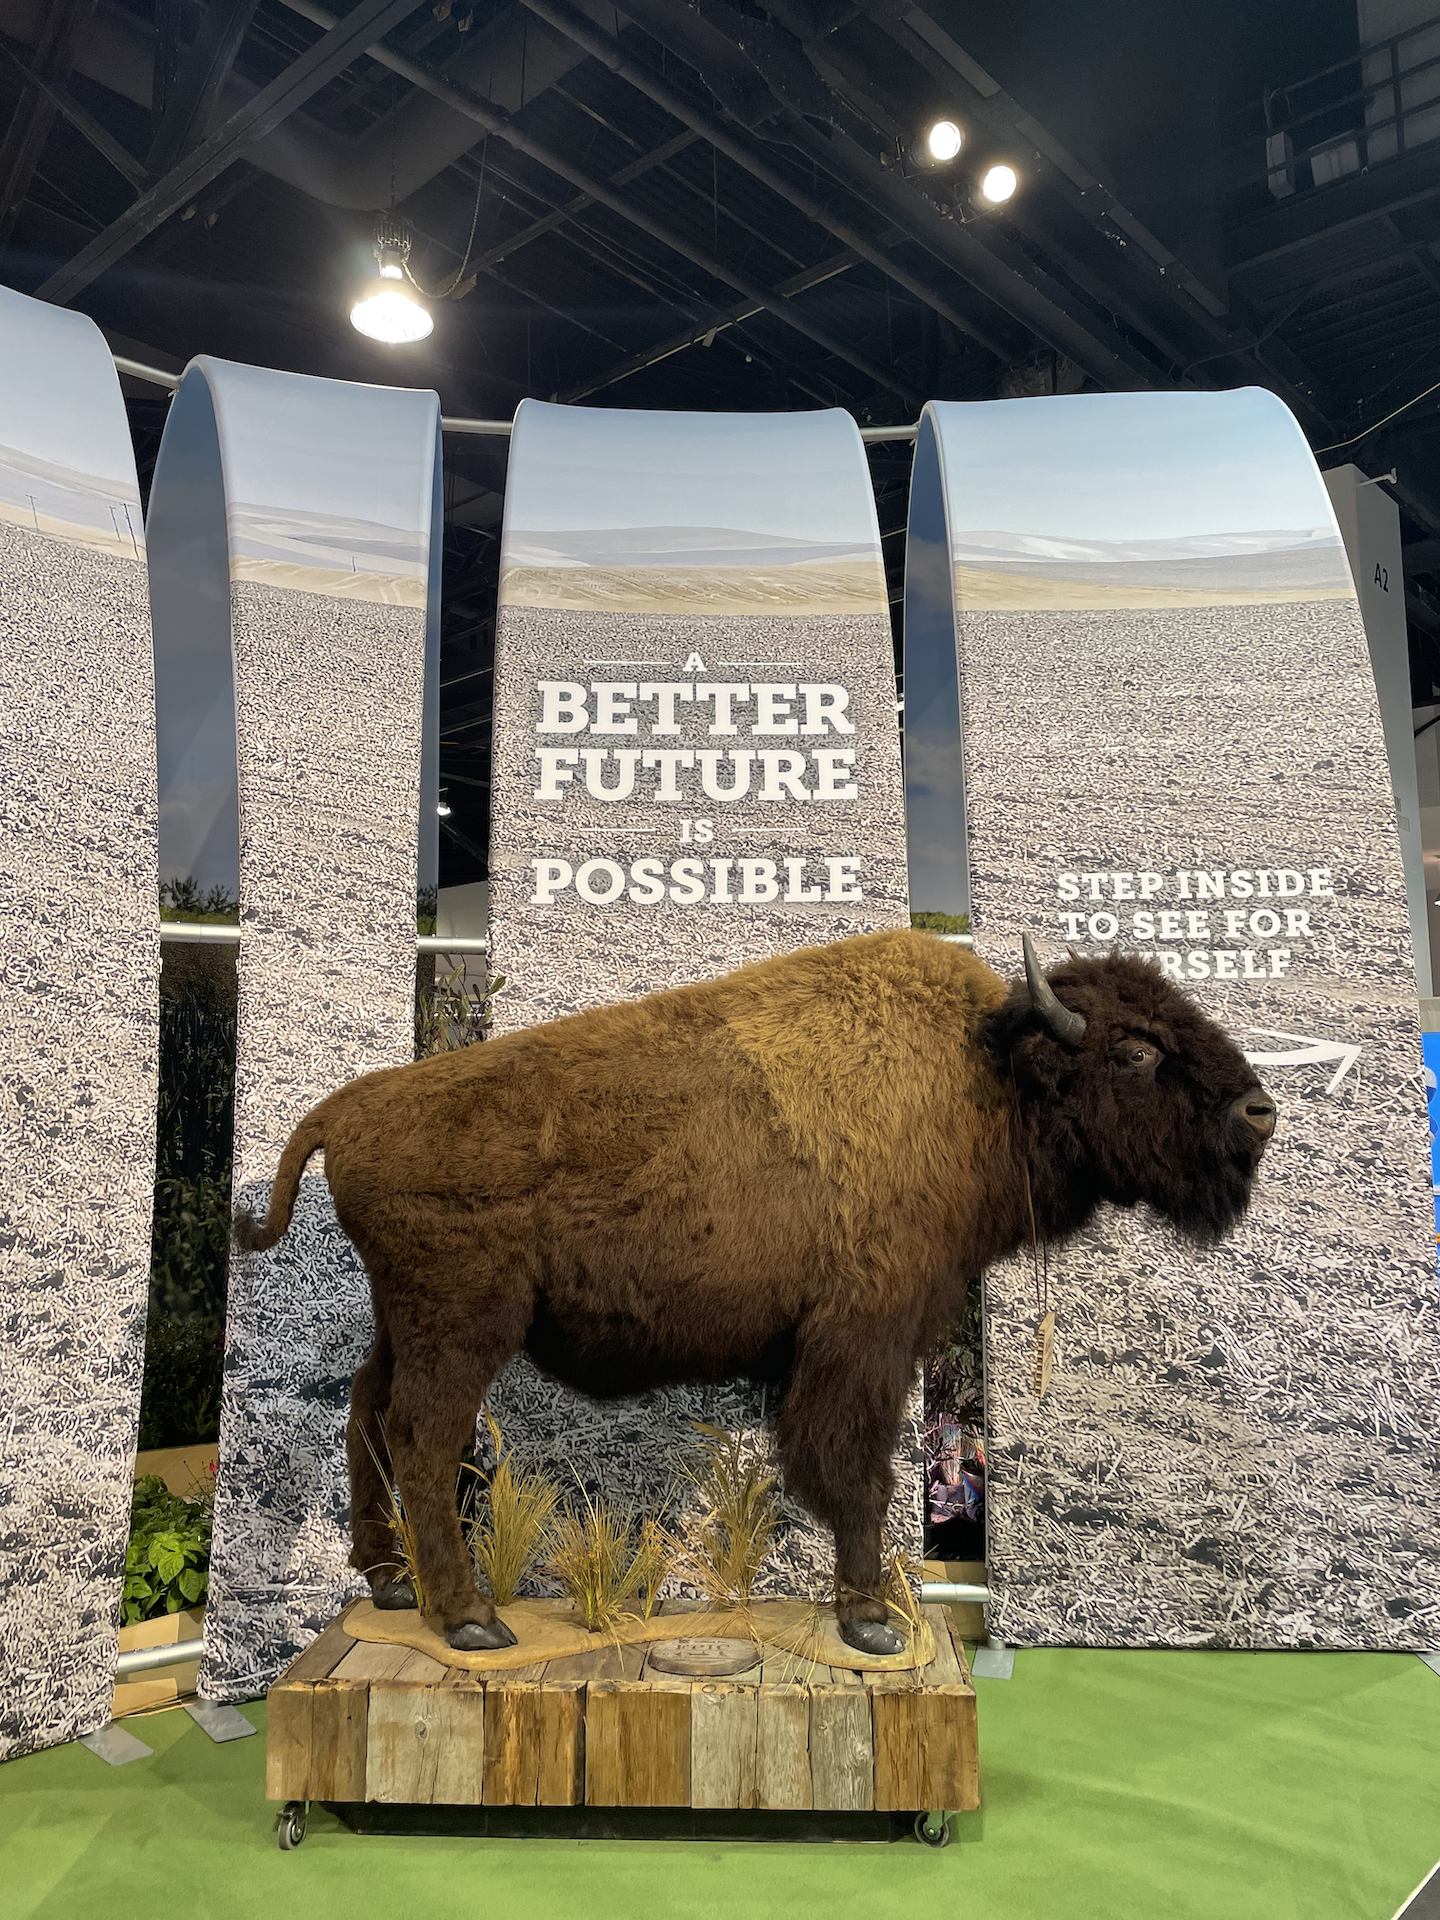 Bison statue below the words "A Better Future is Possible" at our regenerative agriculture booth